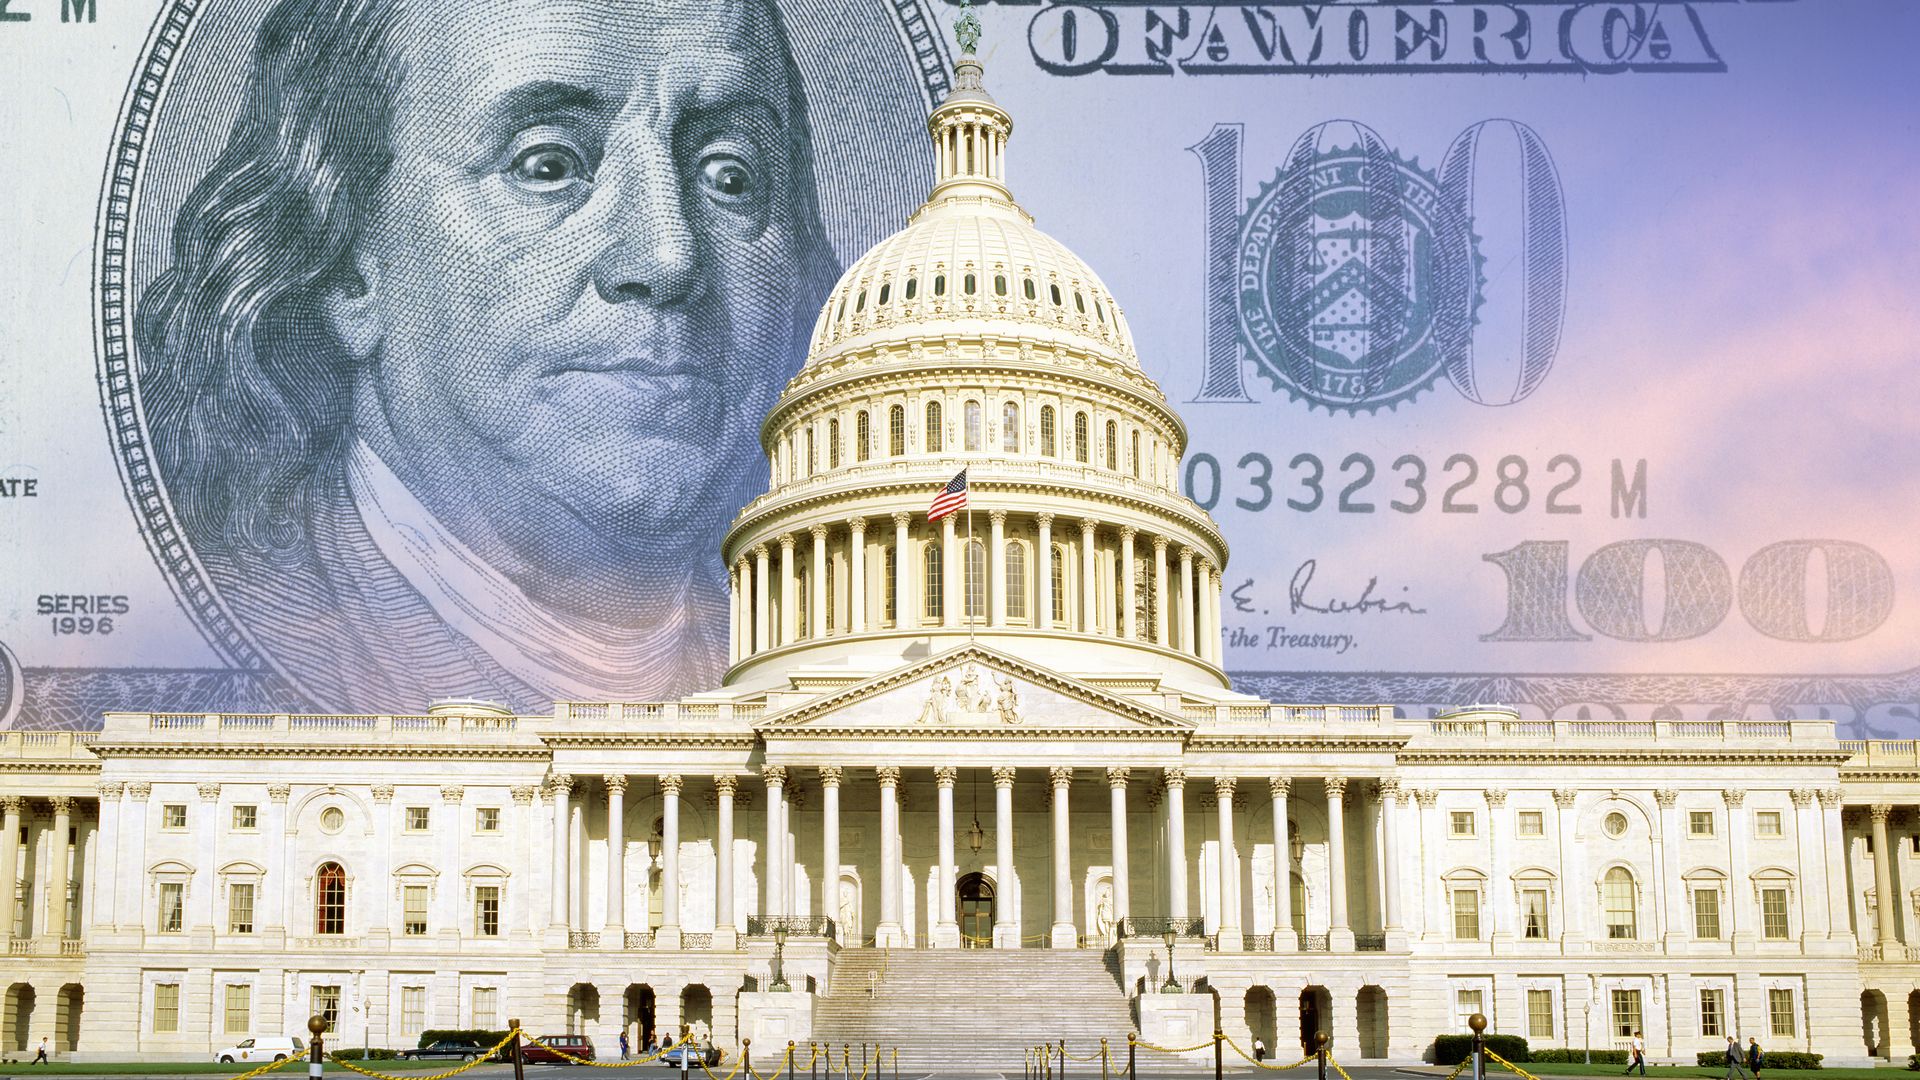  US Capitol with One hundred dollar bill